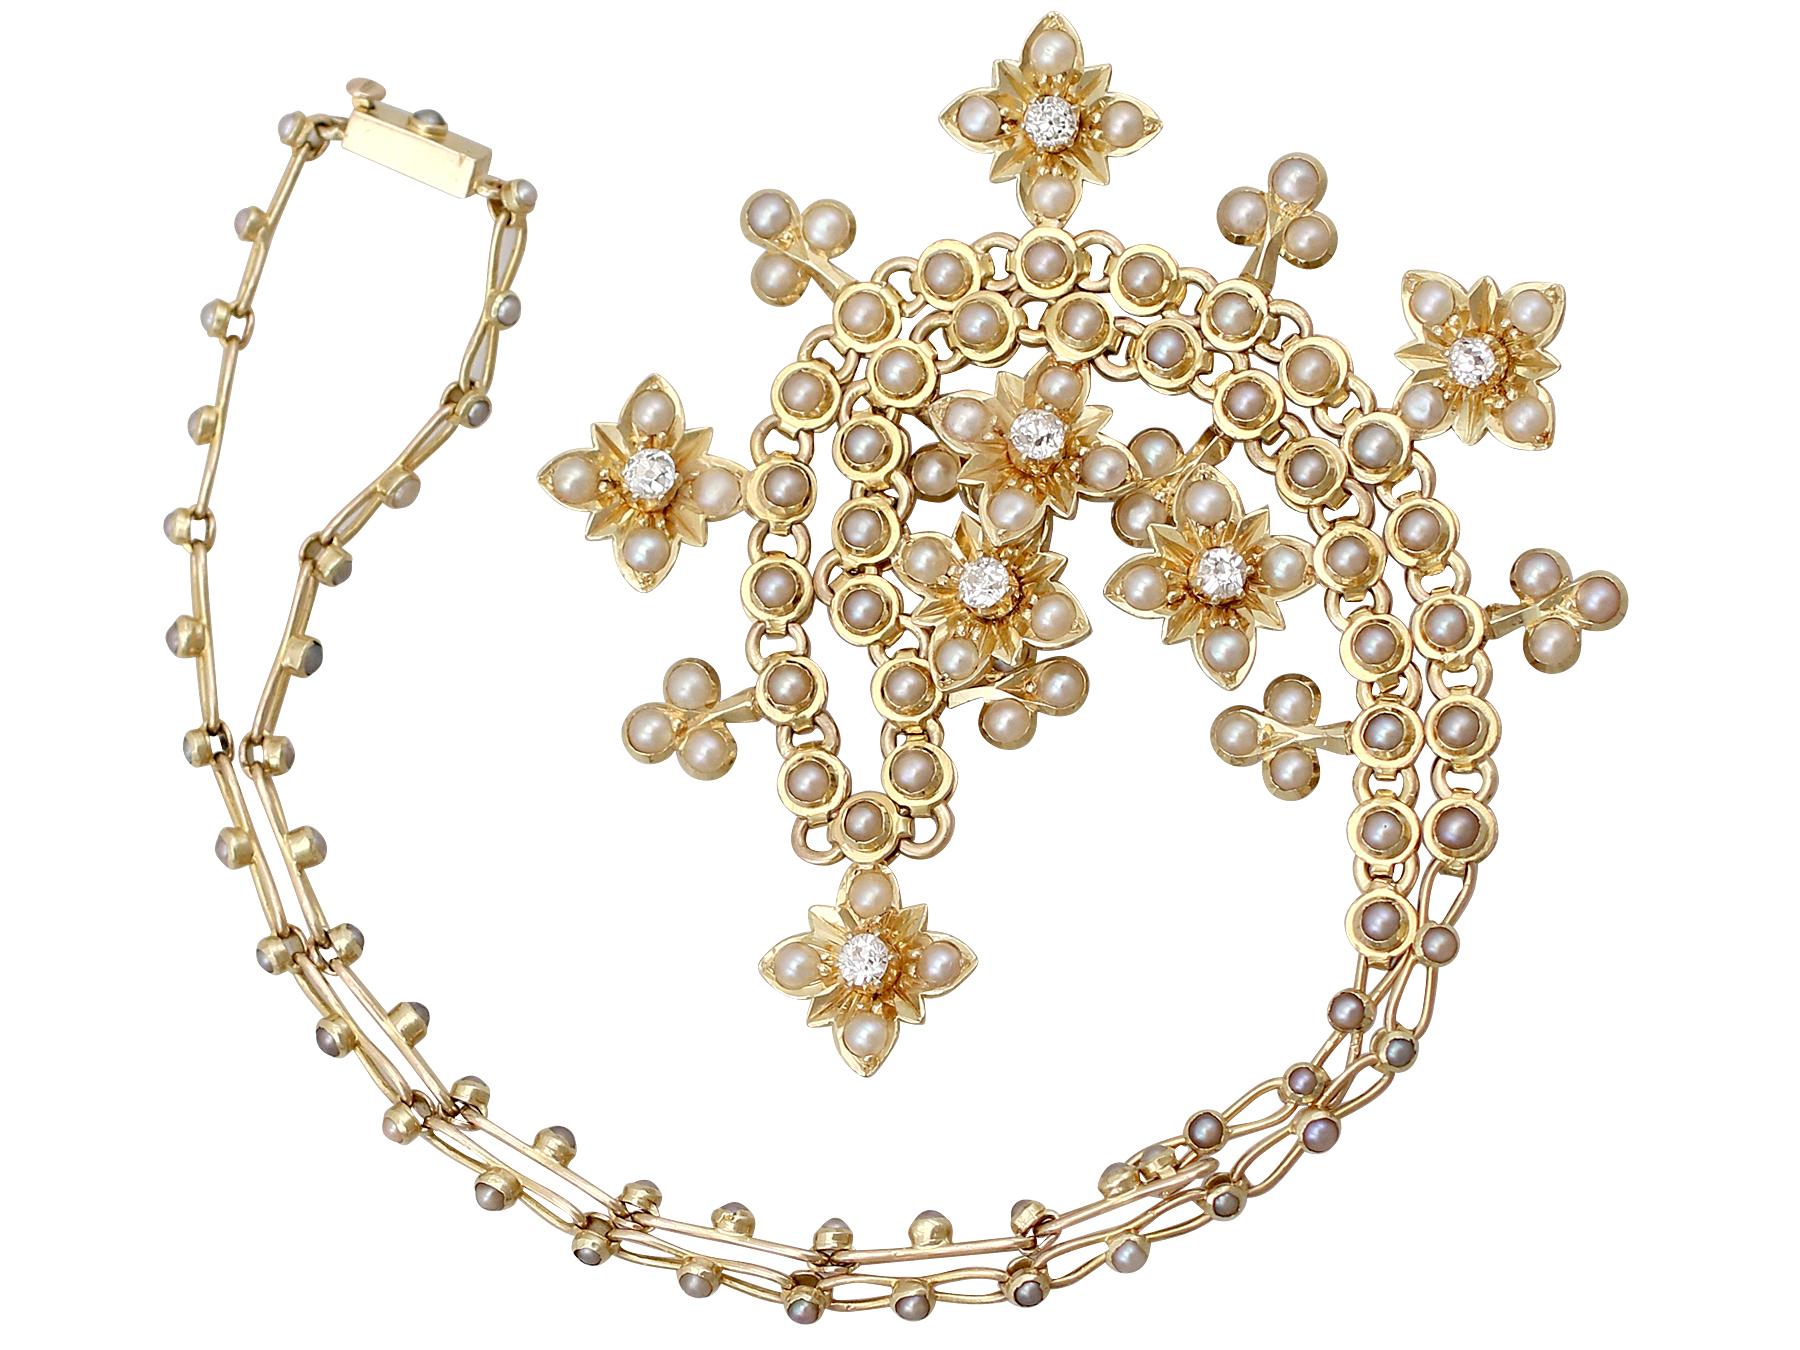 An exceptional antique Victorian 1880s seed pearl and 0.49 carat diamond, 15 karat yellow gold necklace; part of our diverse antique jewelry and estate jewelry collections.

This exceptional, fine and impressive Victorian necklace has been crafted